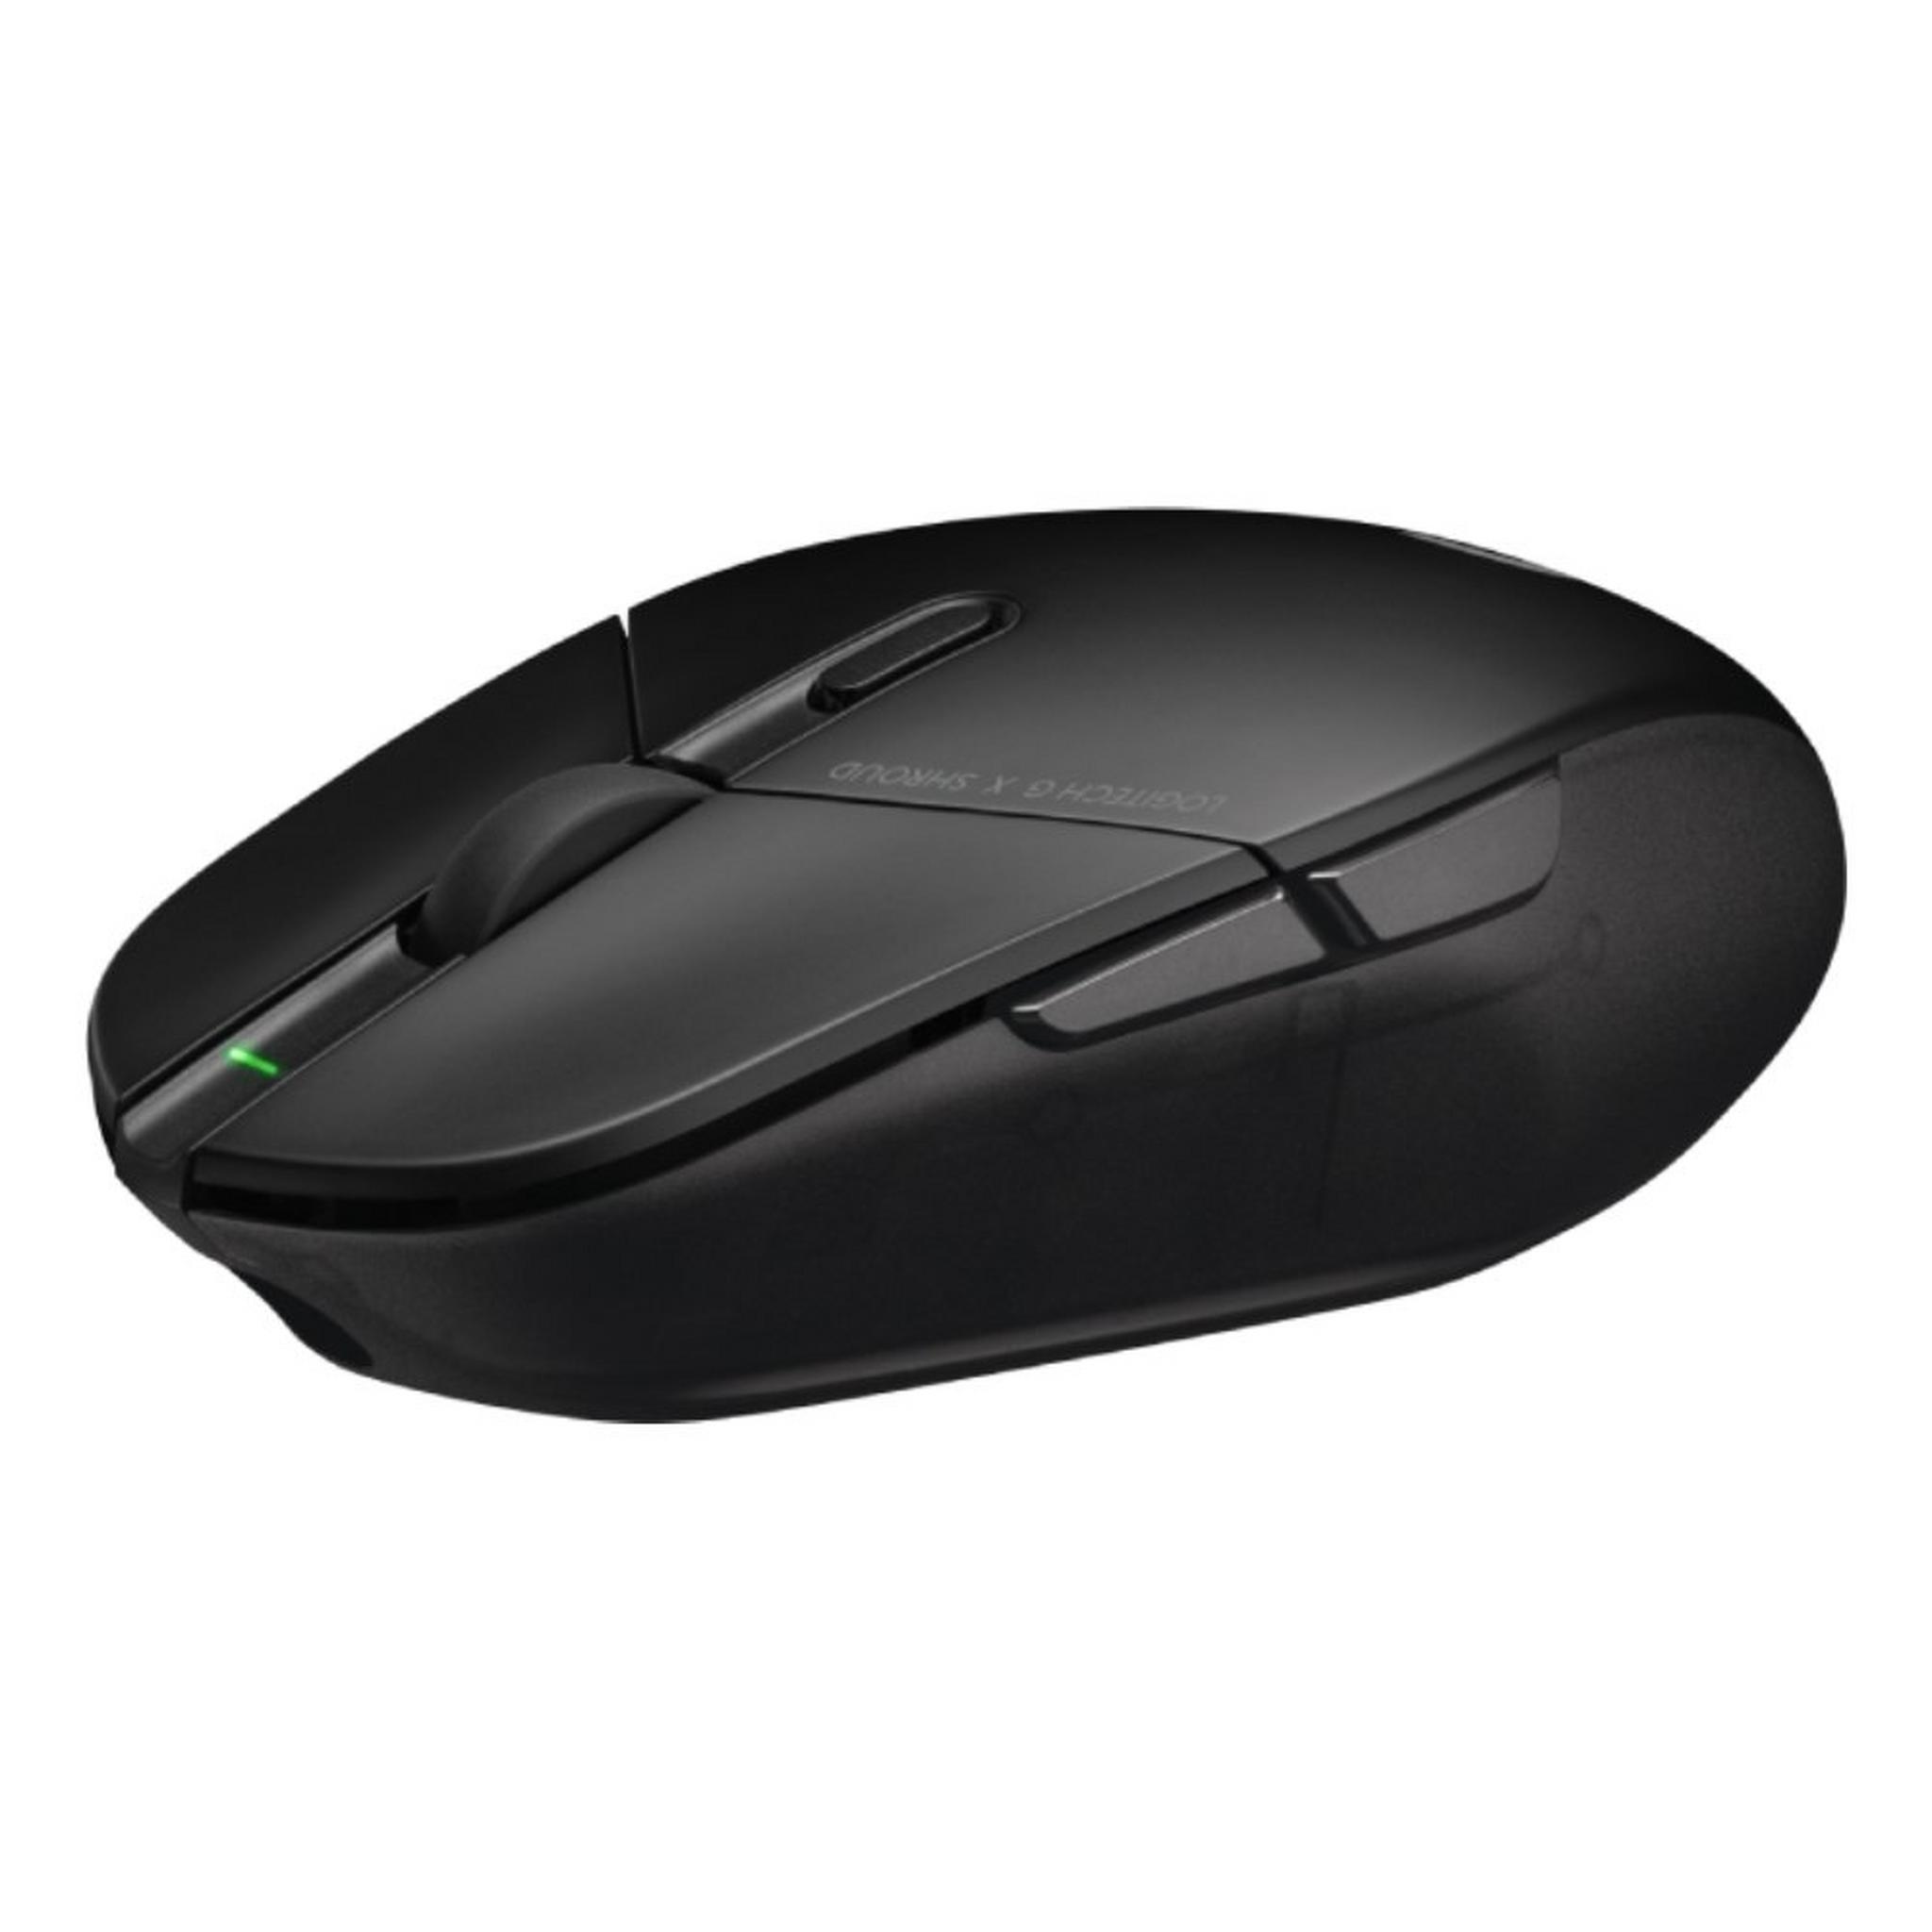 Logitech G303 Wireless Gaming Mouse - Shroud Edition